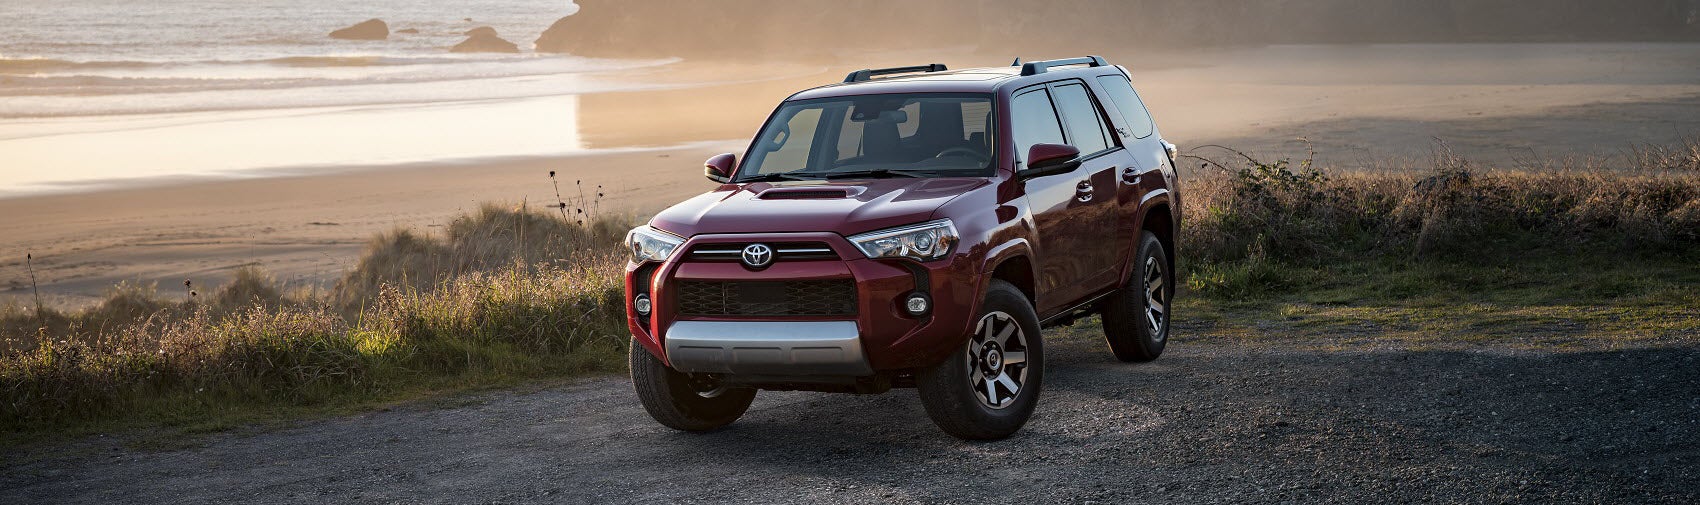 Toyota Vehicle Lease Deals